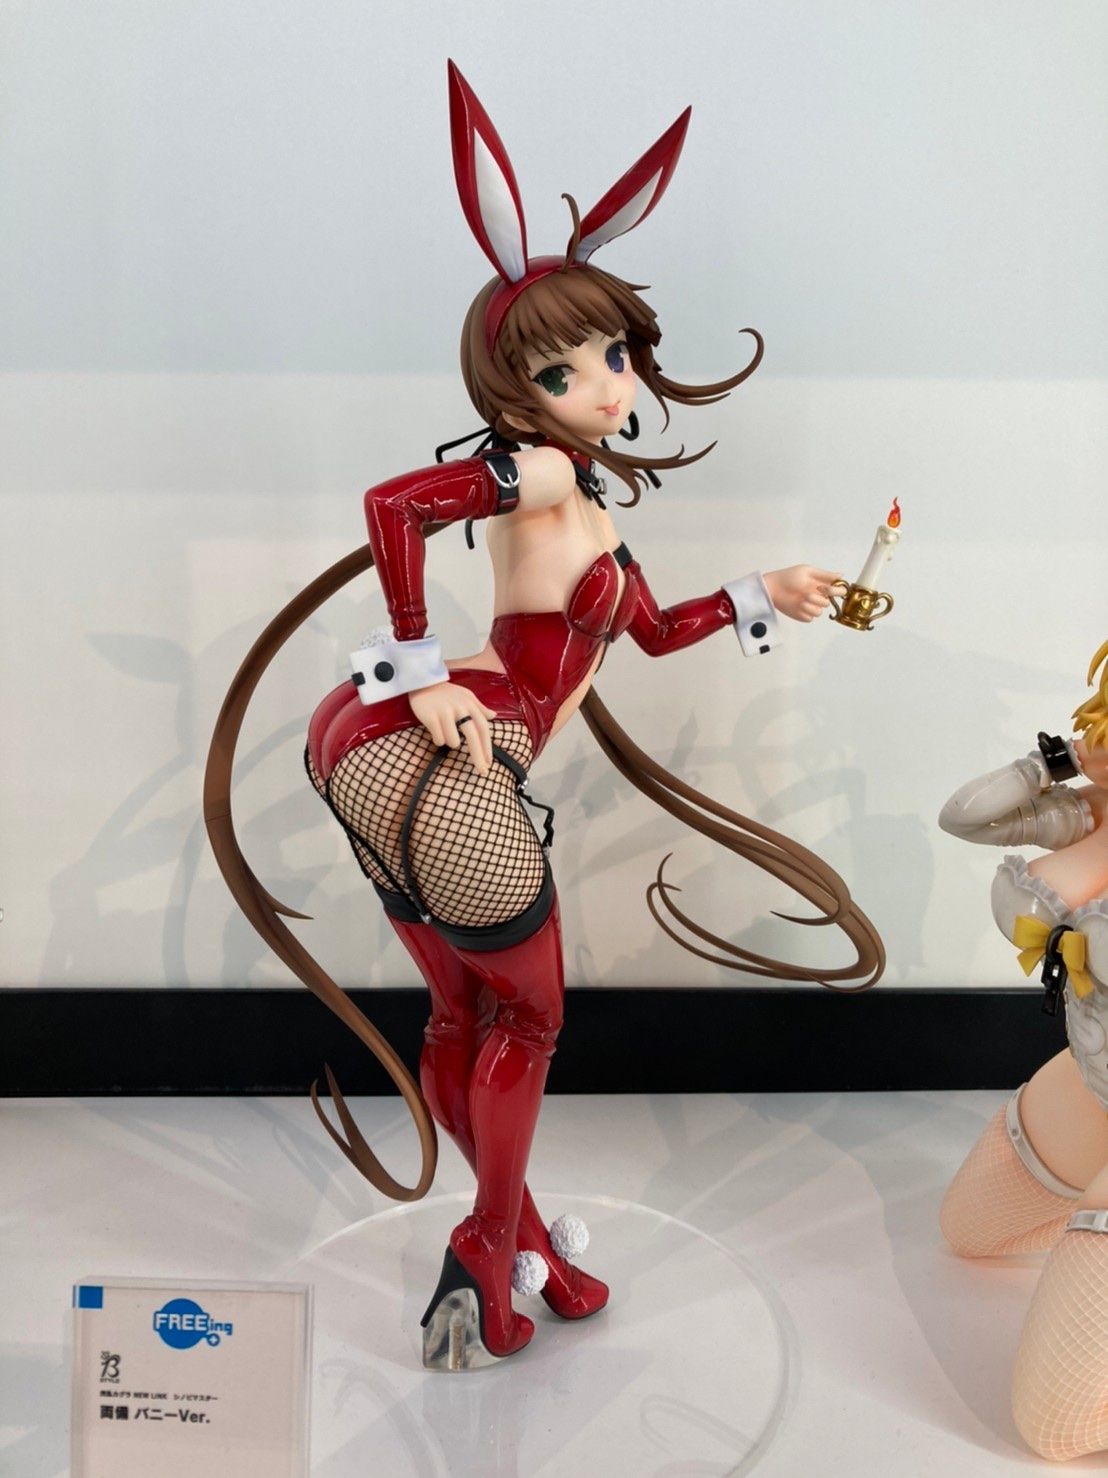 Image: Wai spends 140,000 on Echiechi figures again this month 17